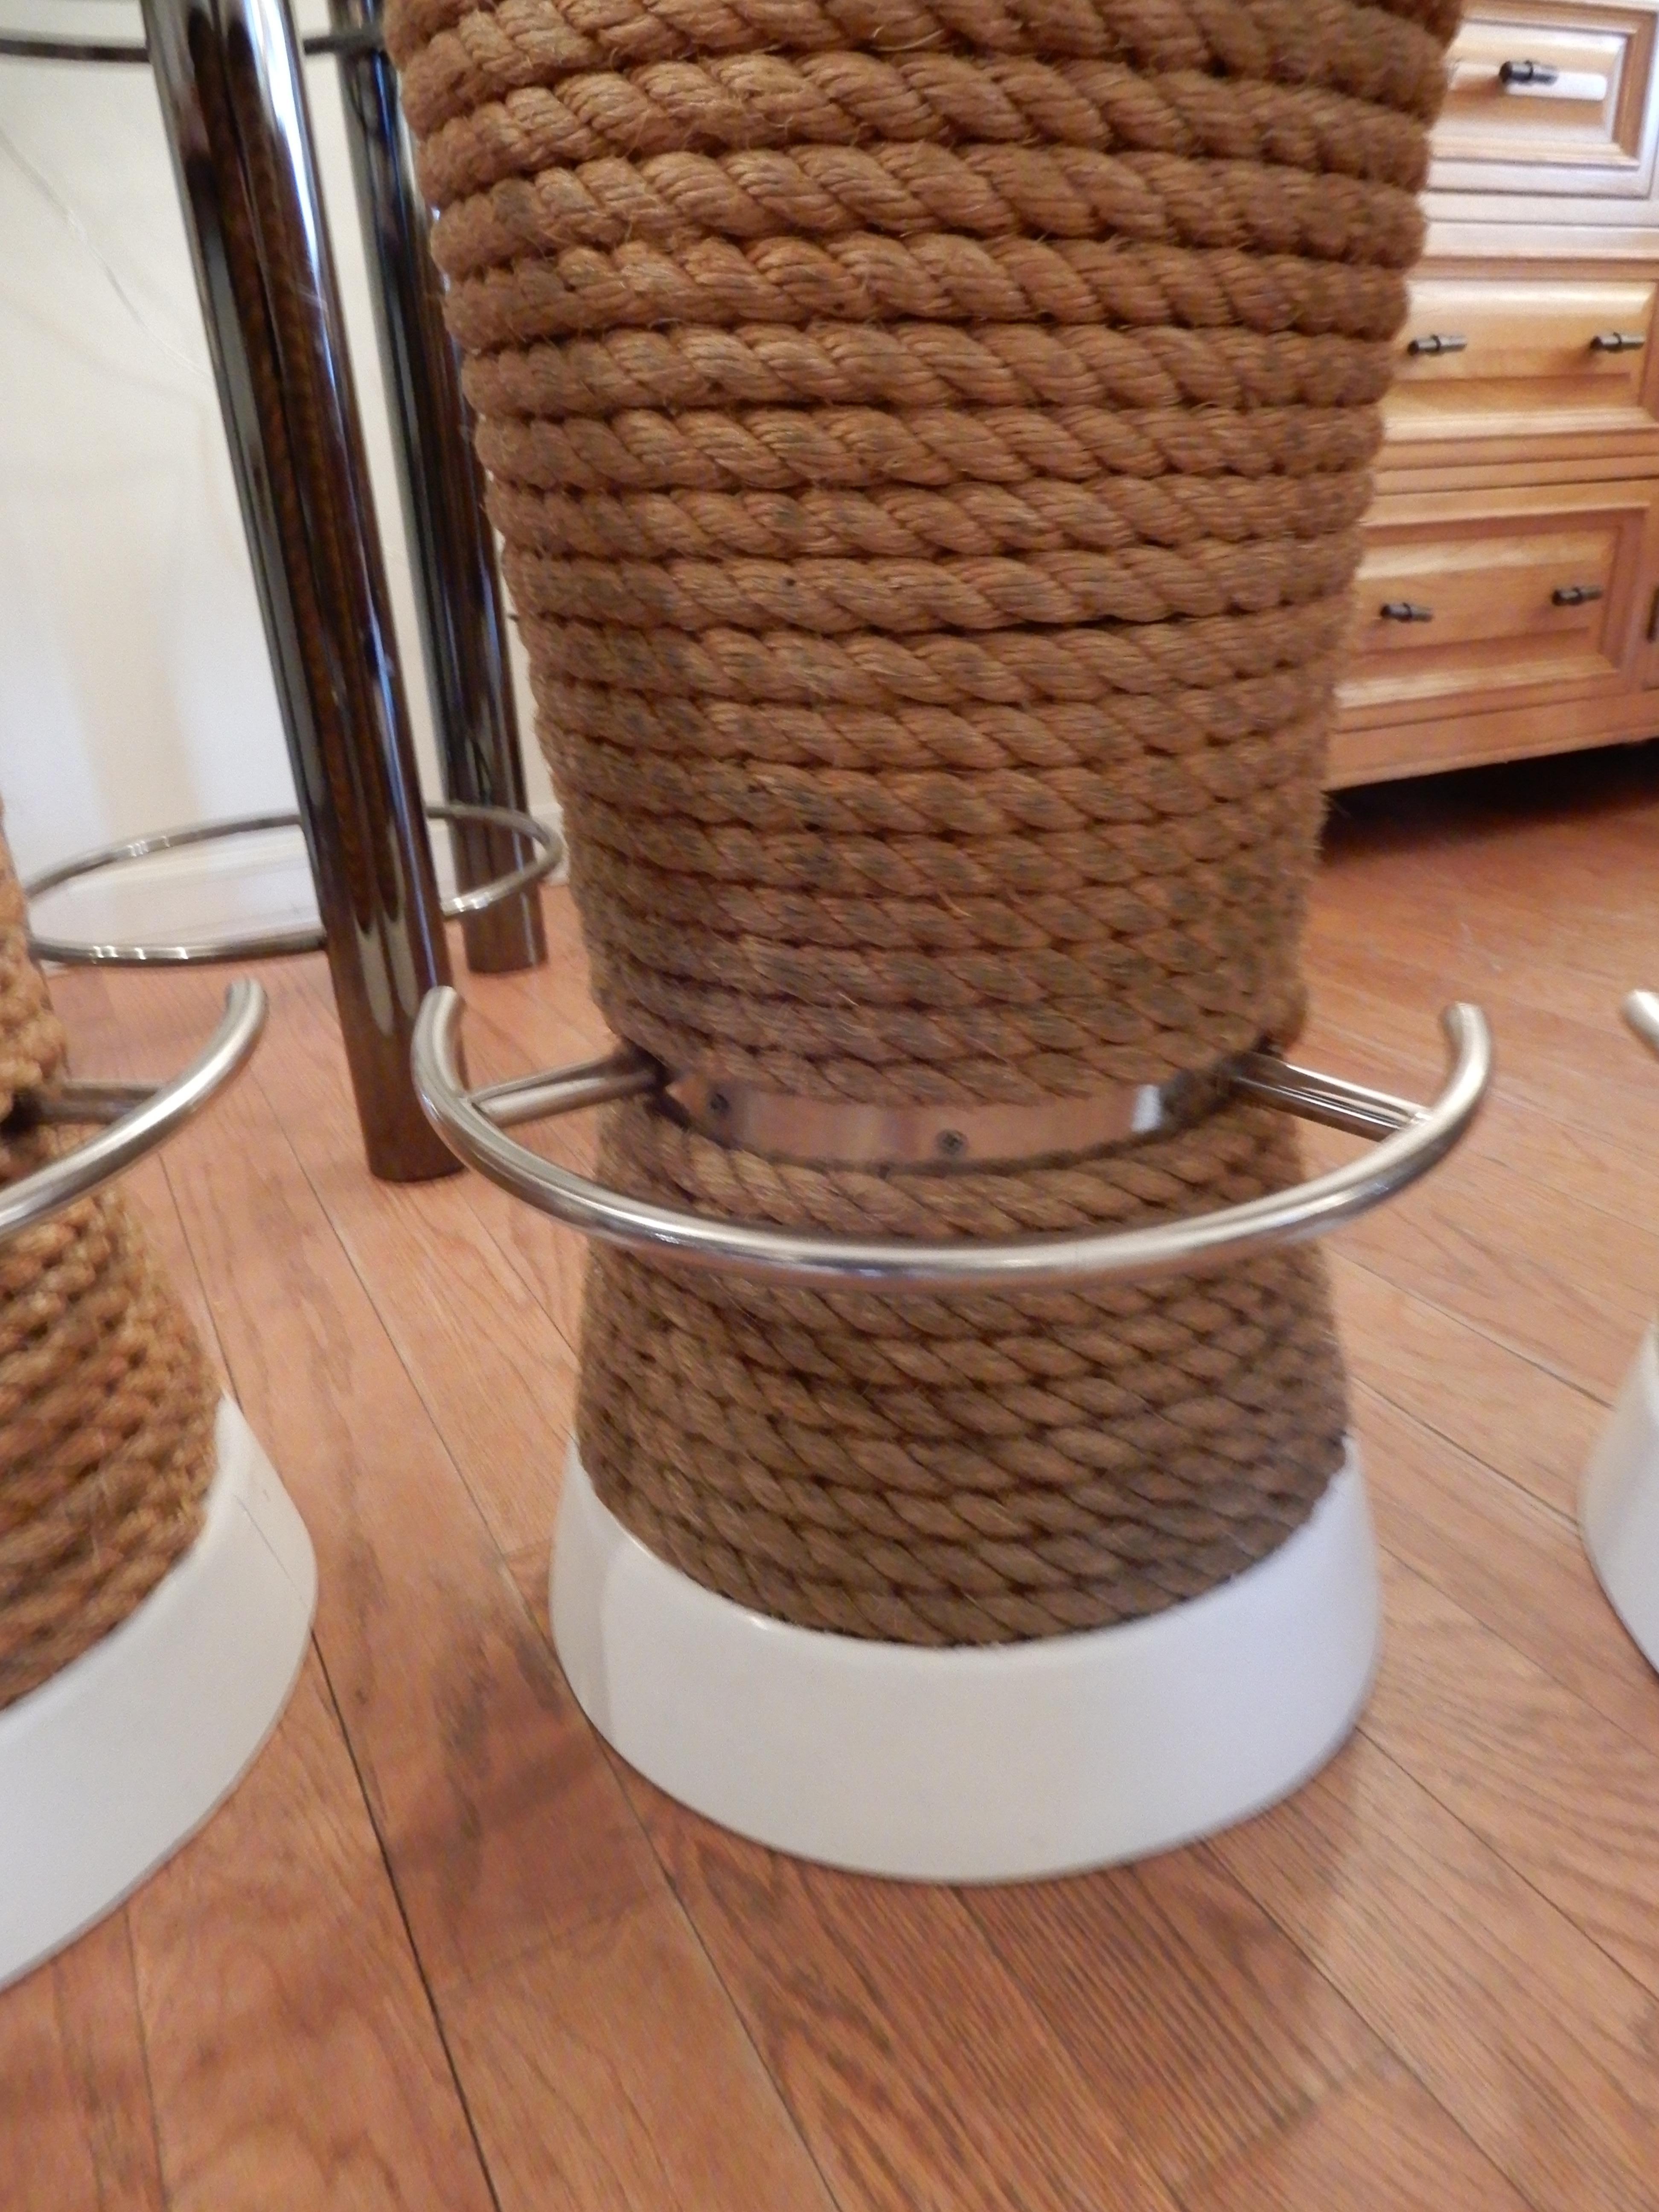 Selling three high bar or counter stools, rope wrapped around teak wood, white tops and bottom band. Polished steel foot rests, heavy duty, made to last, indoor, outdoor.